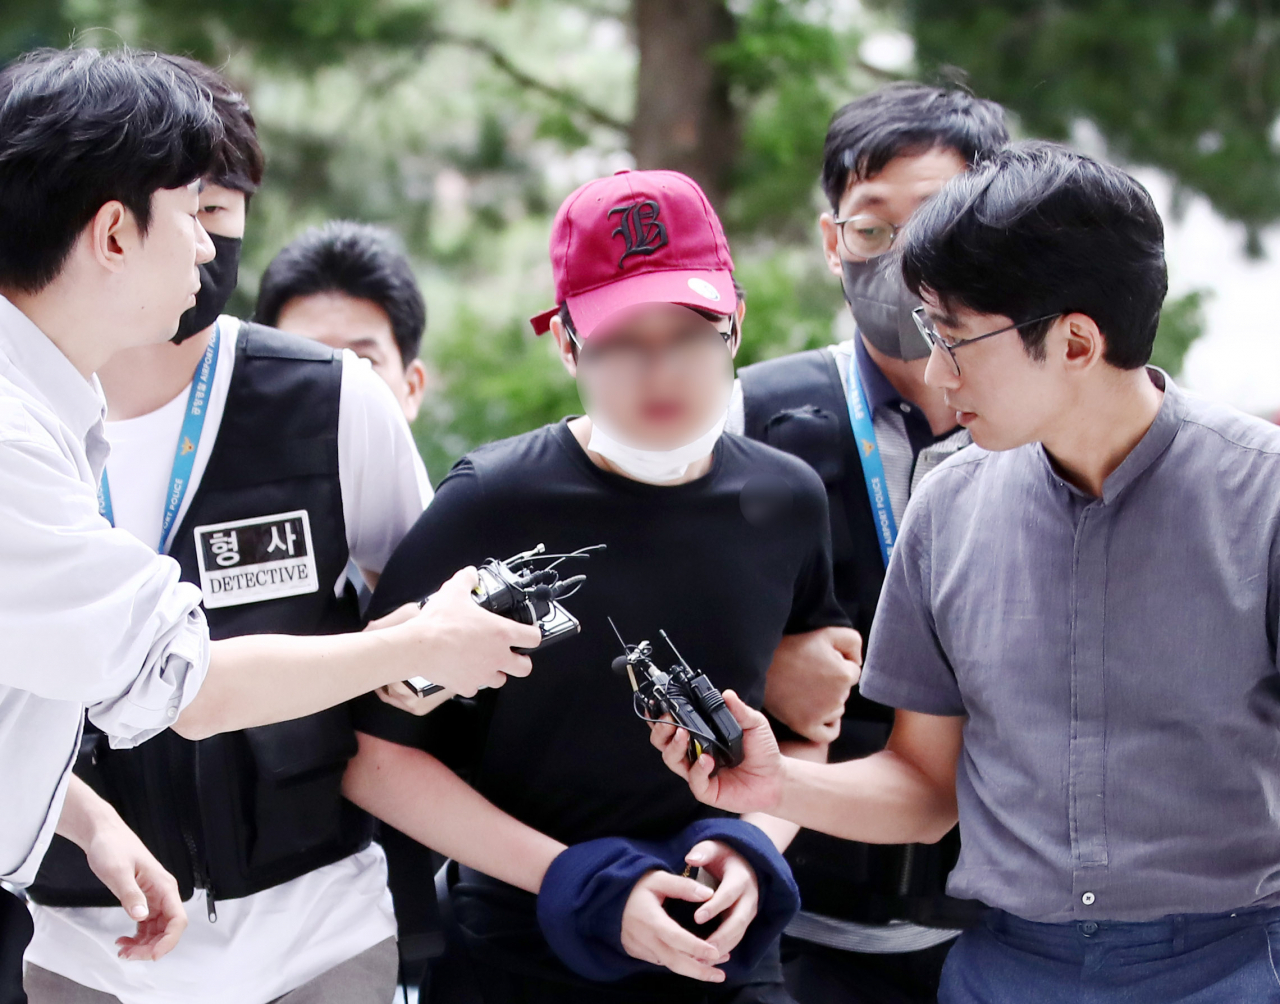 Reporters question a 19-year-old accused of attempting to open an emergency door of a plane during flight at the Incheon District Court in Incheon on June 20, before attending his arrest warrant hearing. (Yonhap)